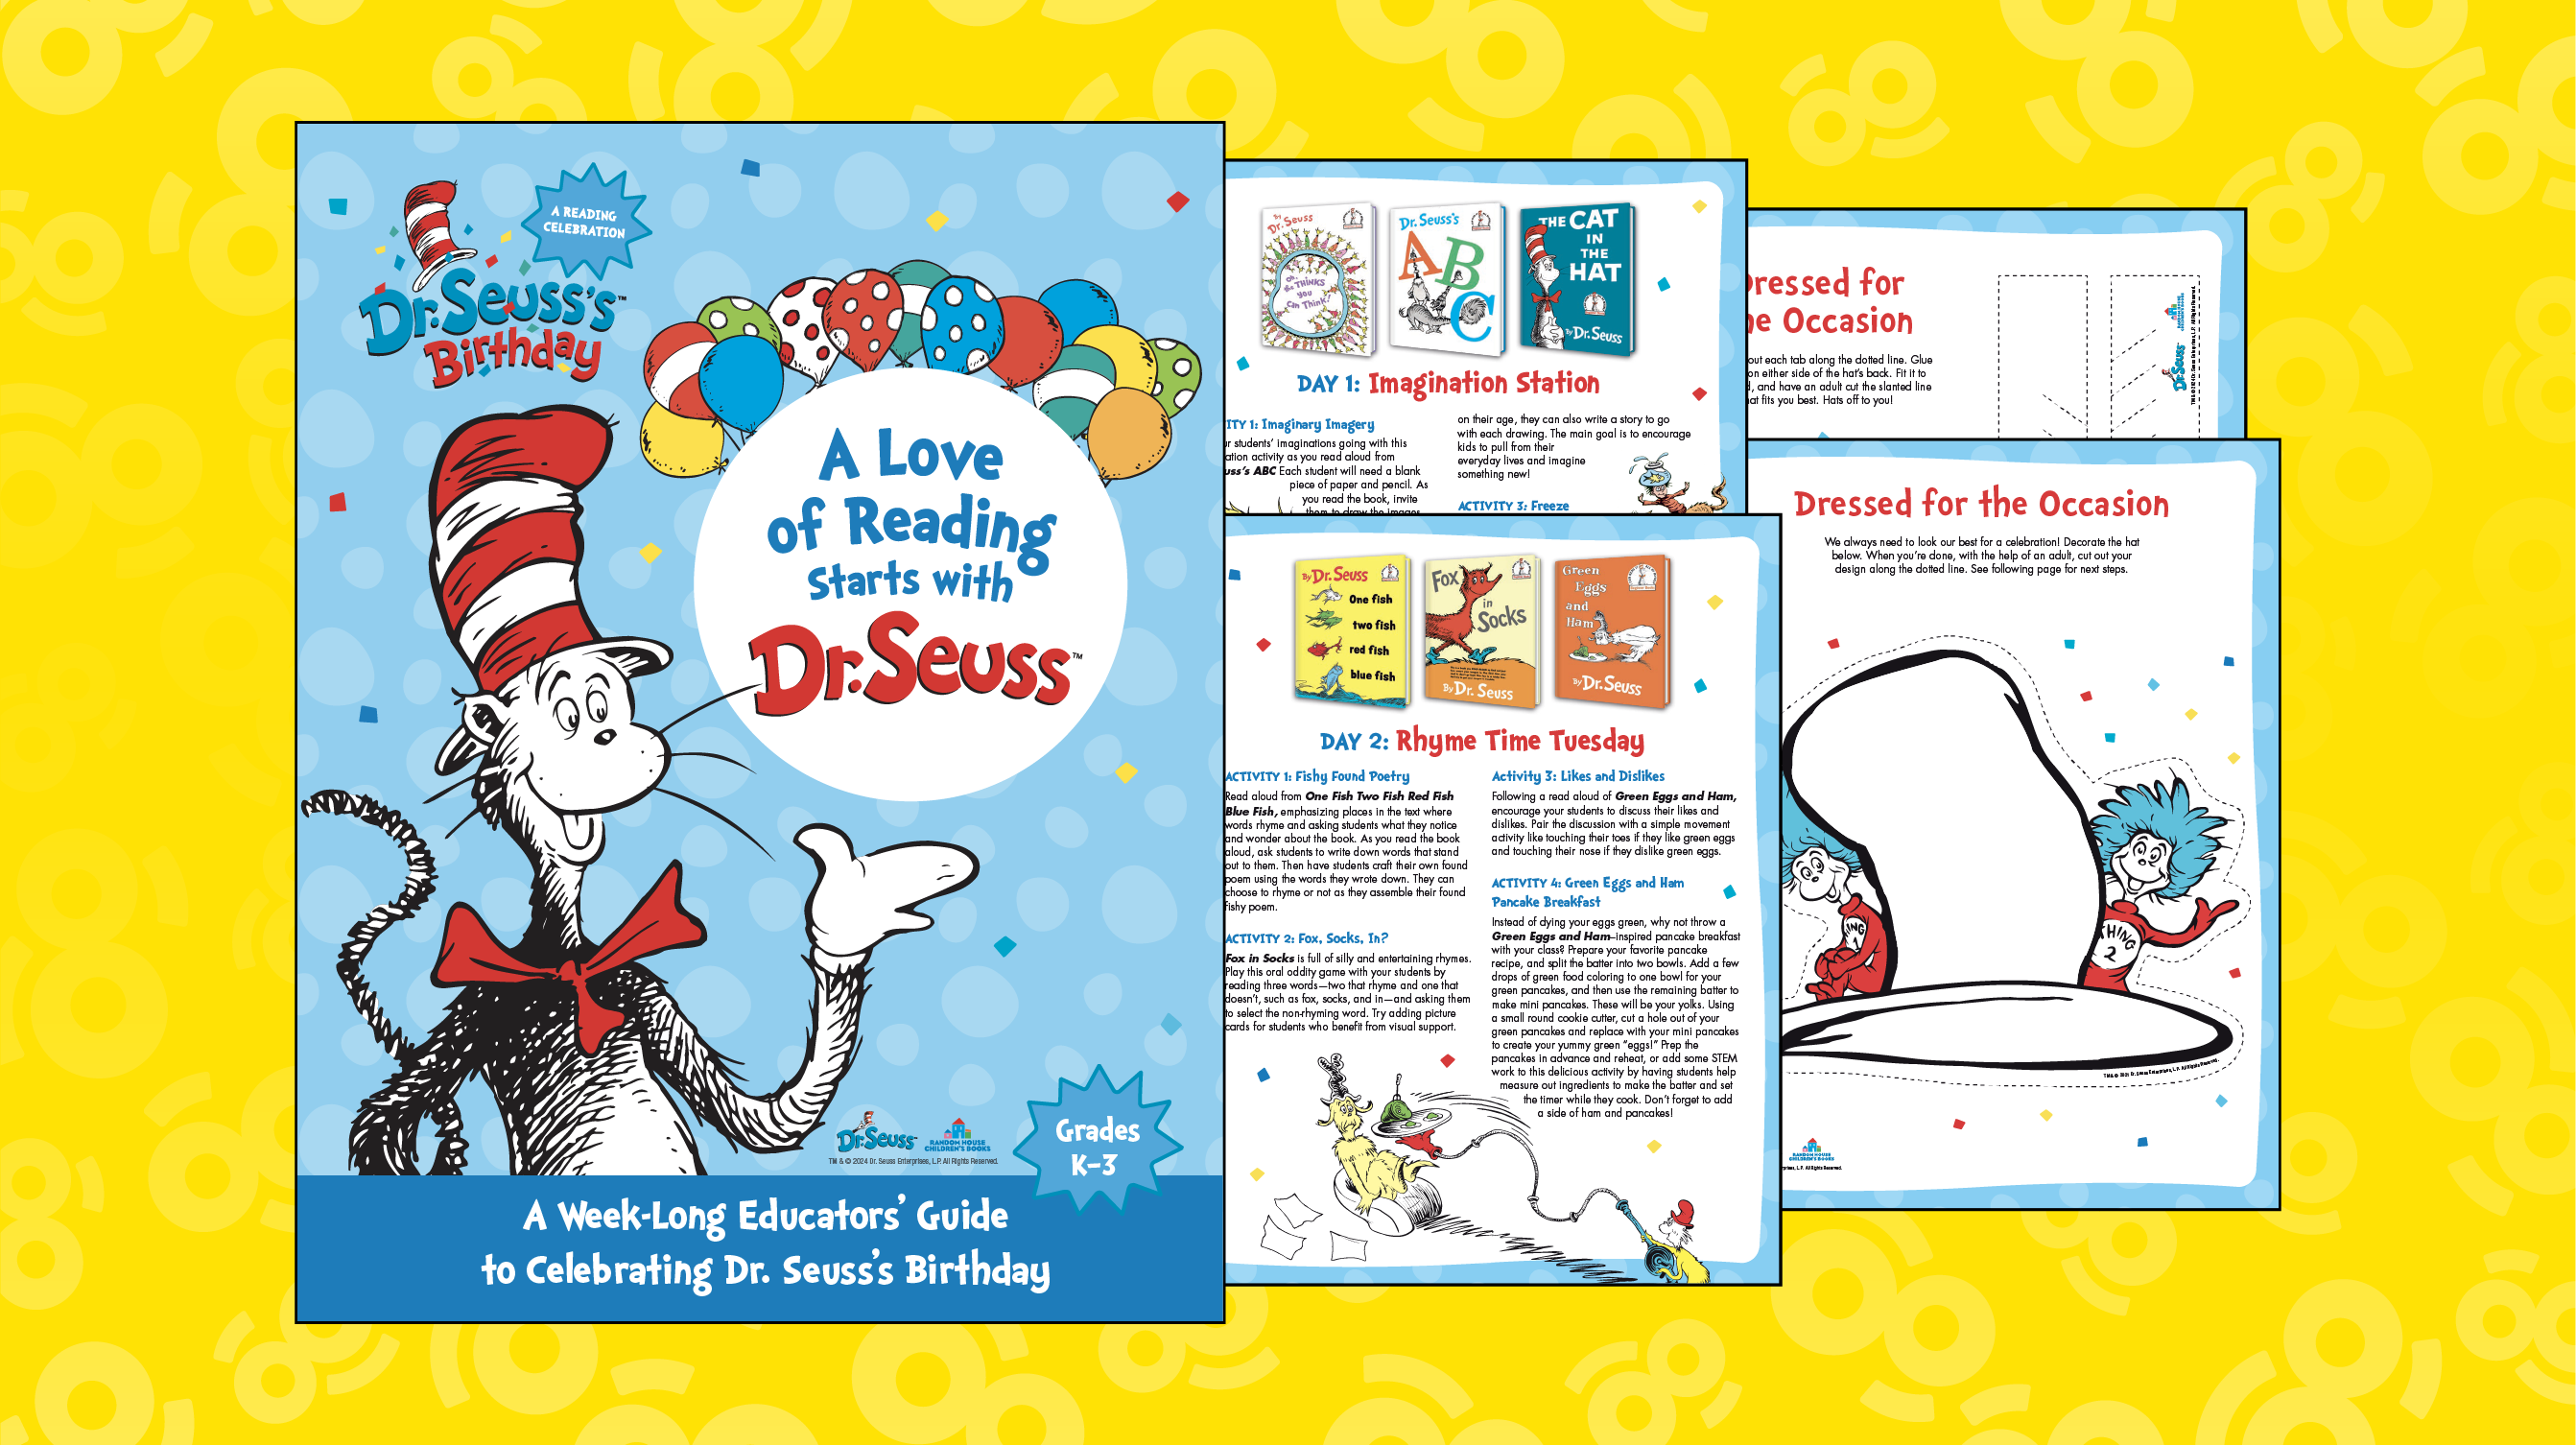 A Love of Reading Starts with Dr. Seuss